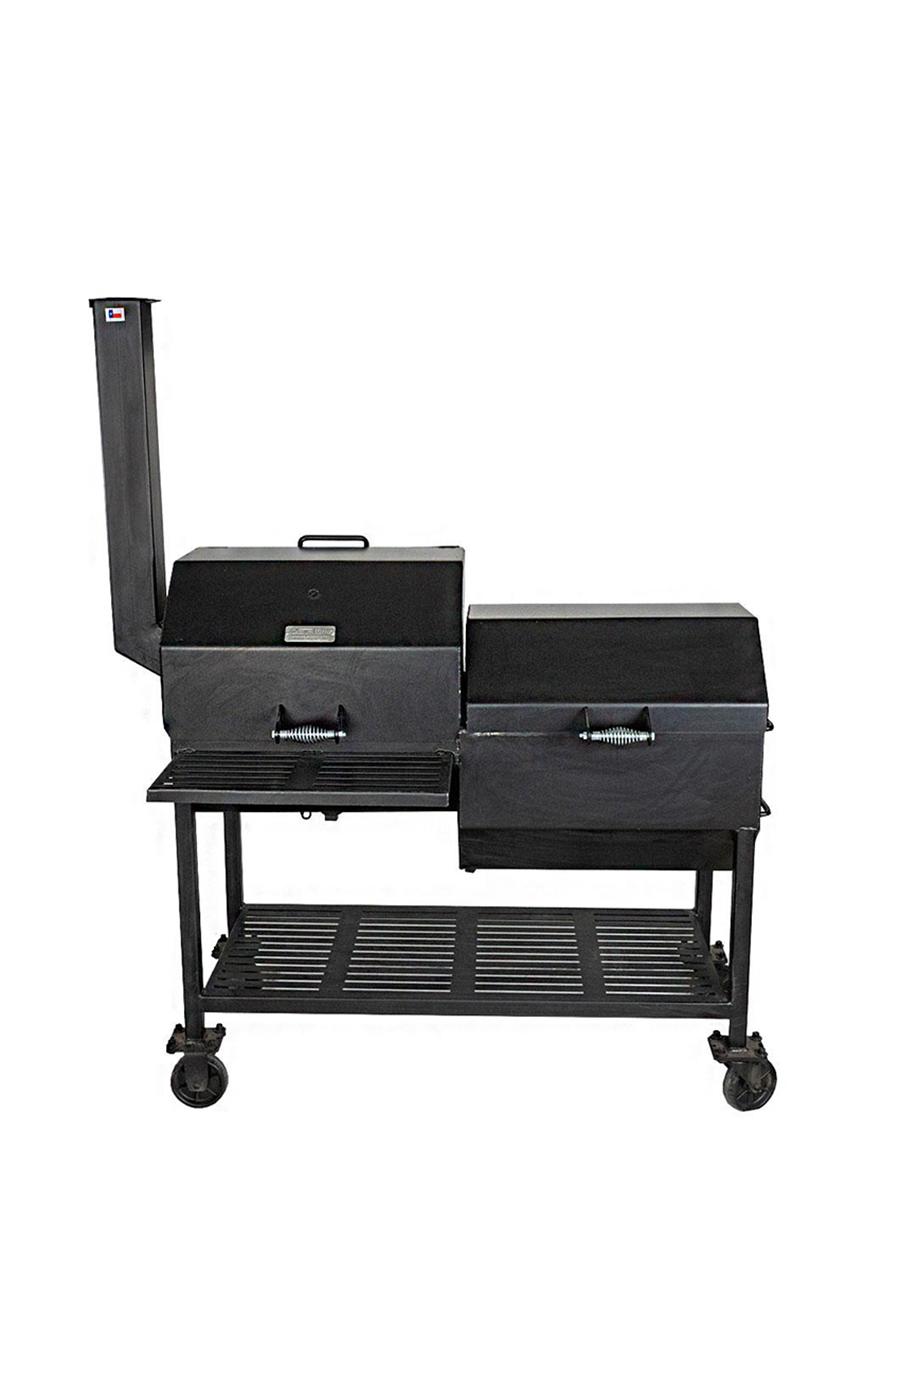 All Seasons Feeders Charcoal BBQ Pit with Firebox; image 1 of 7